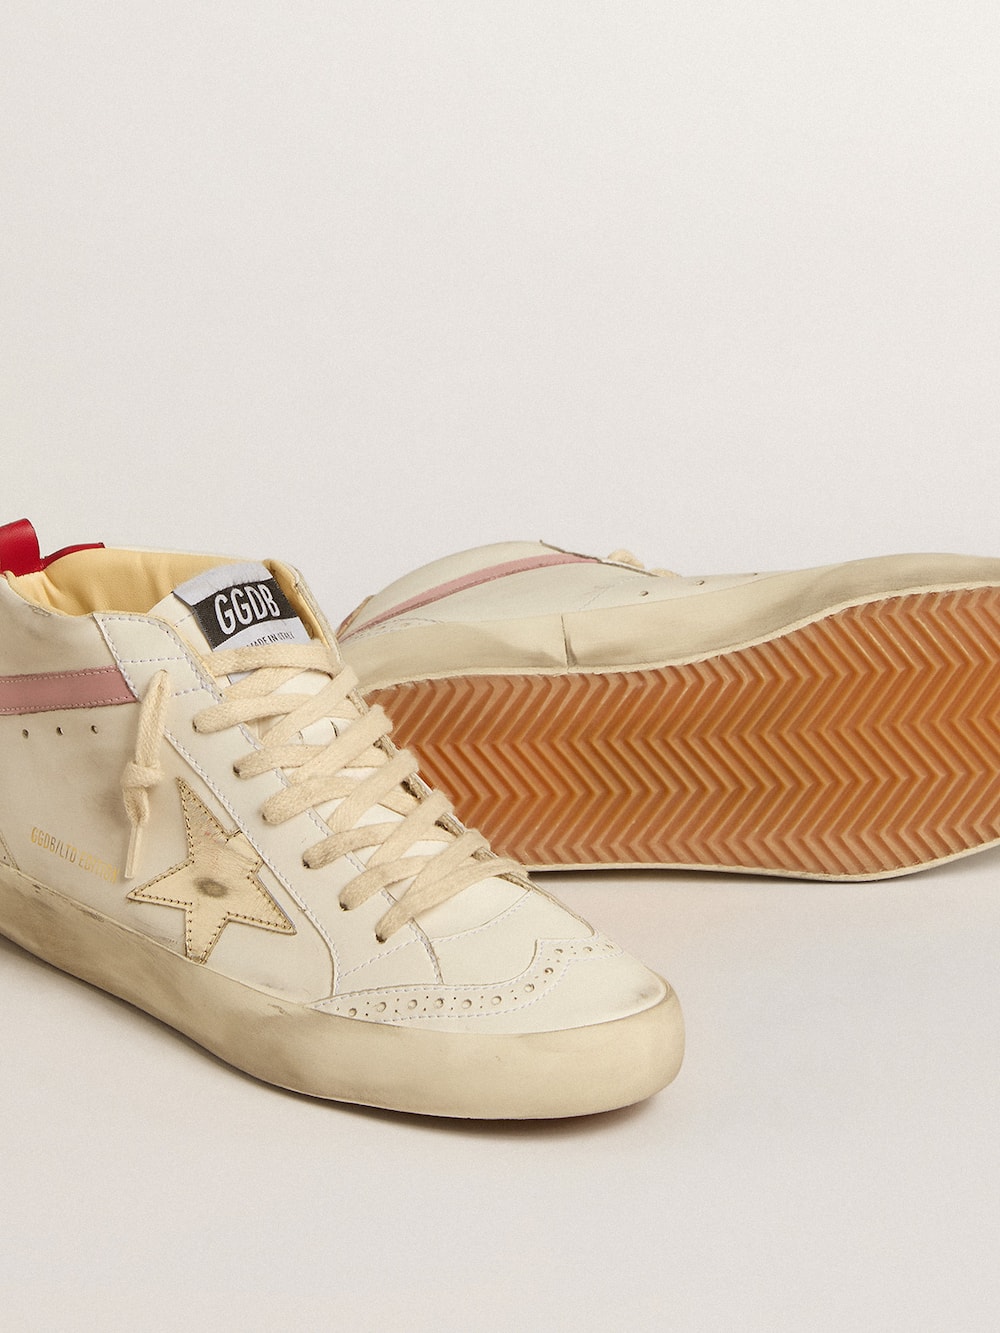 Golden Goose - Bio-based Mid Star LTD with gold leather star and pink flash in 